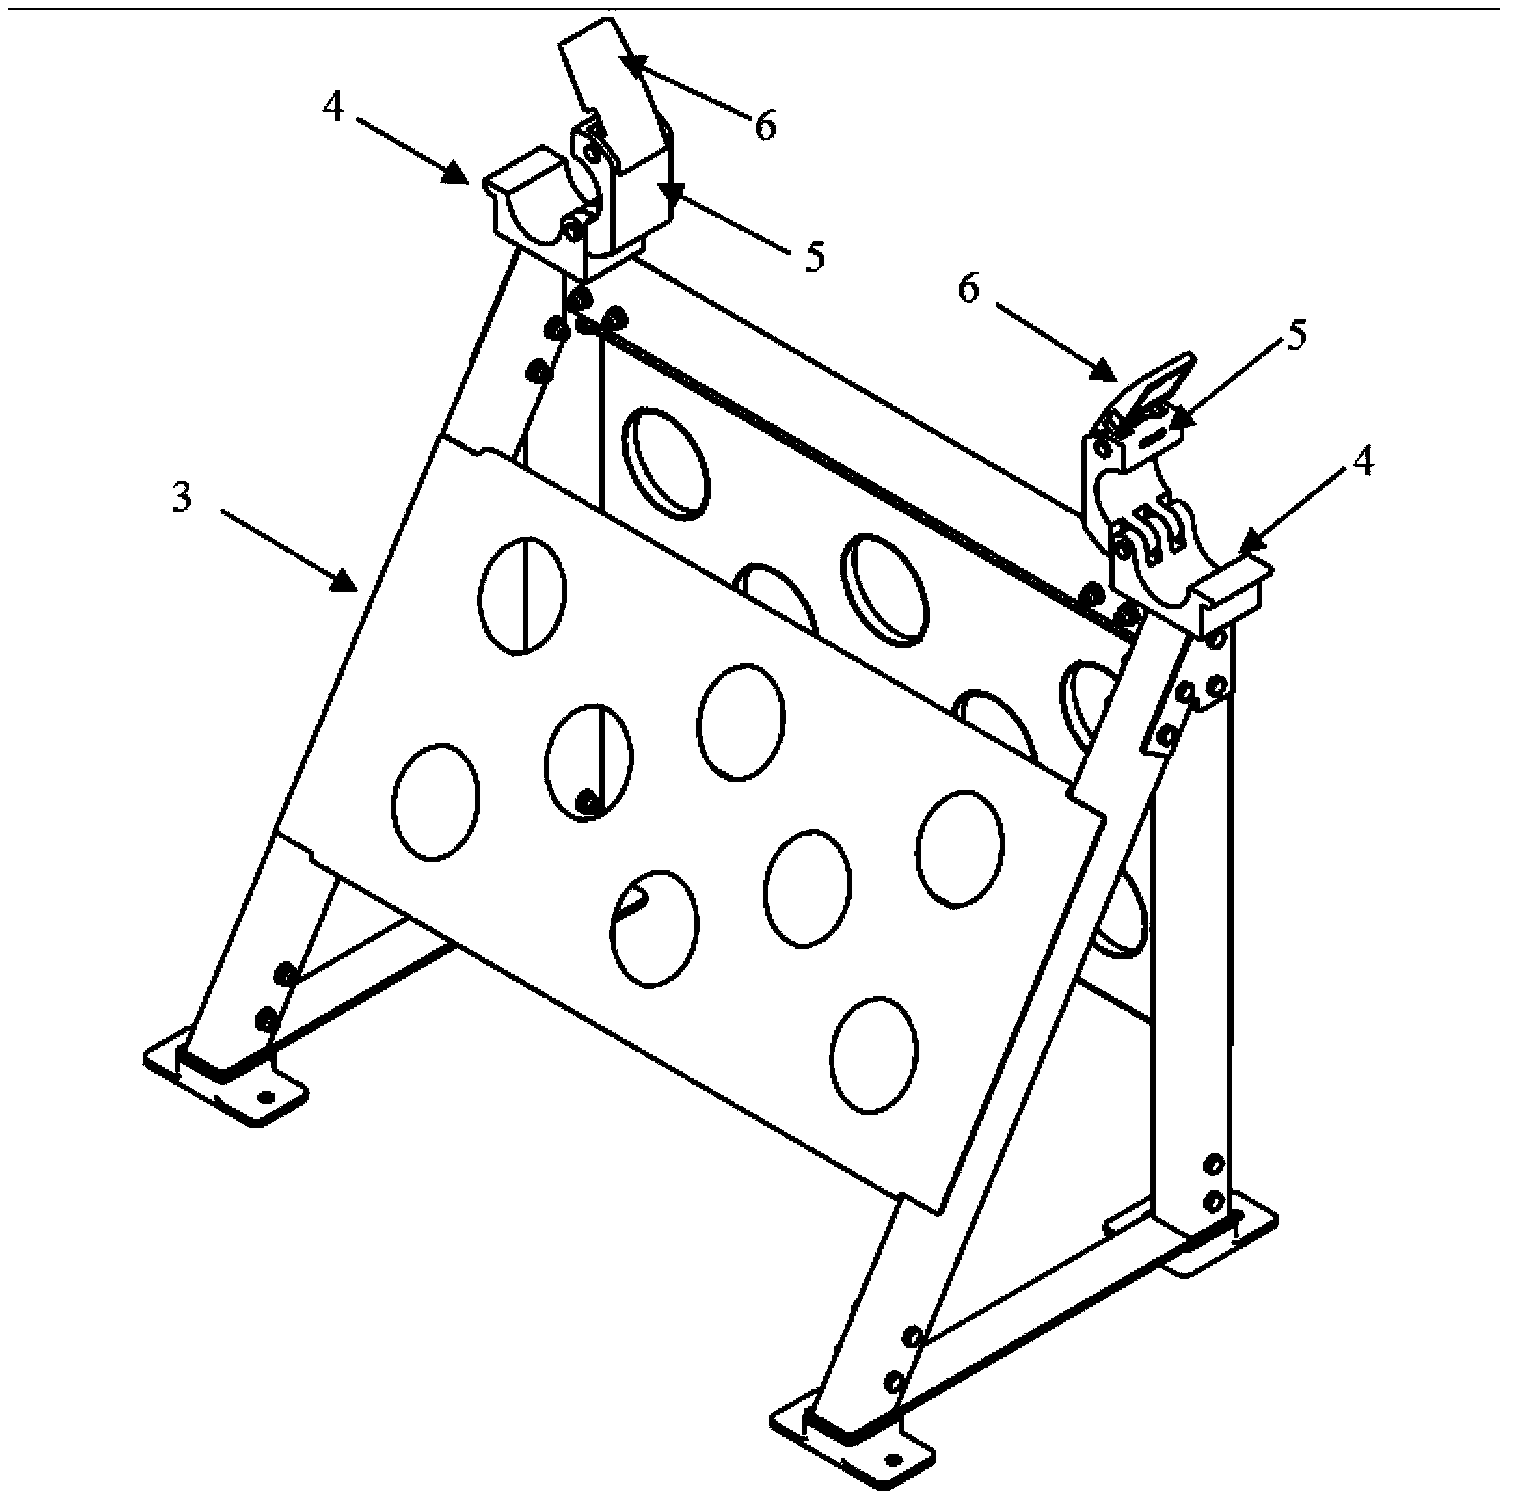 Supporting structure for mounting stretcher on helicopter